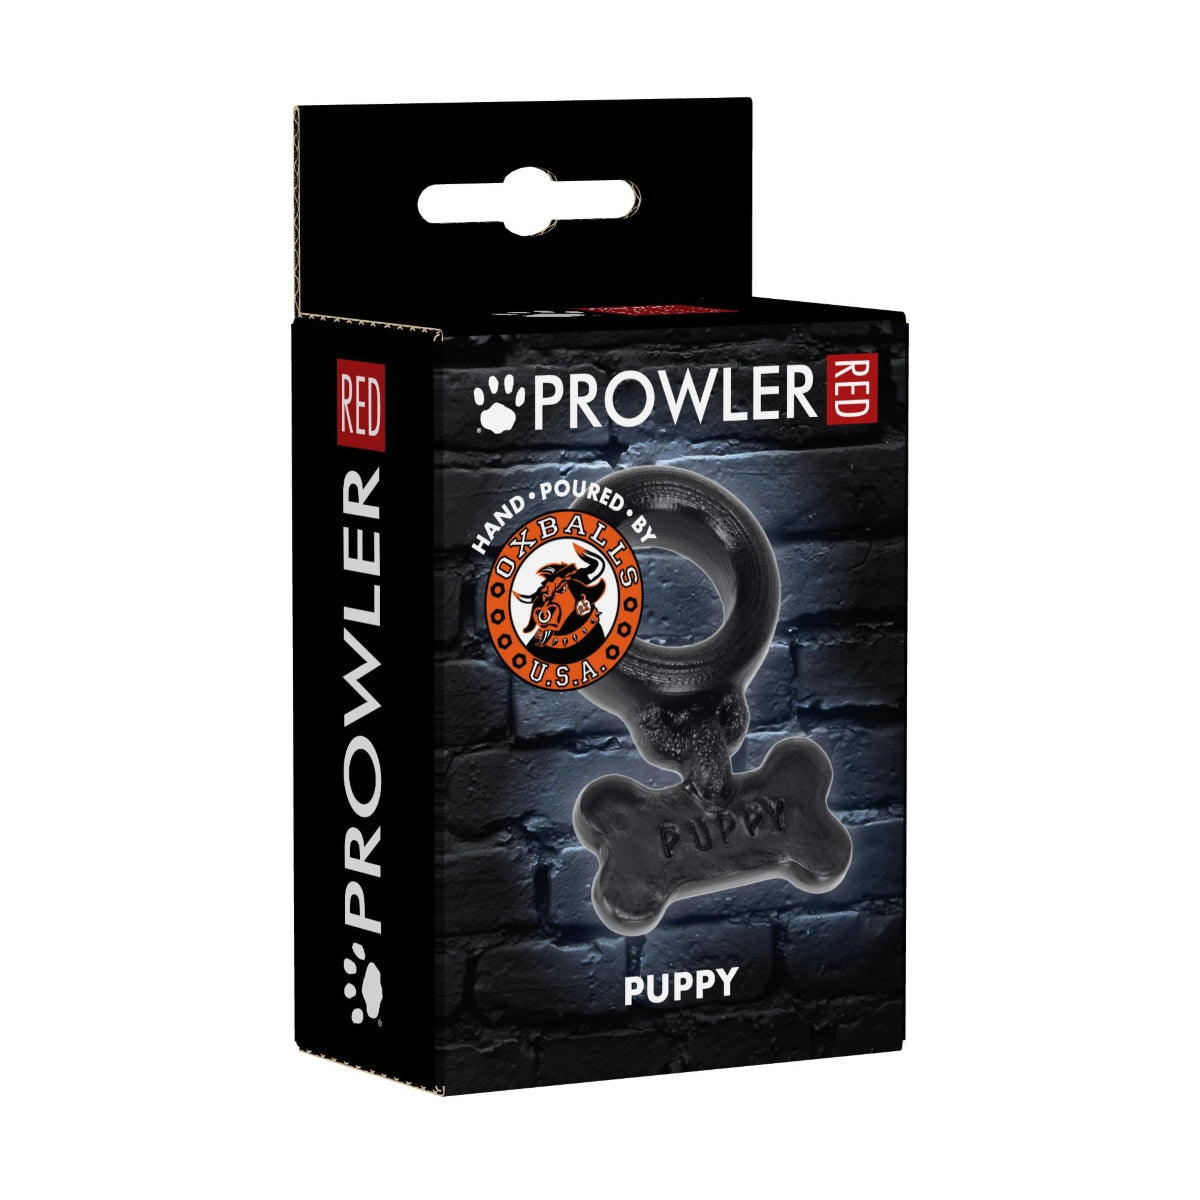 Prowler RED PUPPY by Oxballs Black (8070258458863)